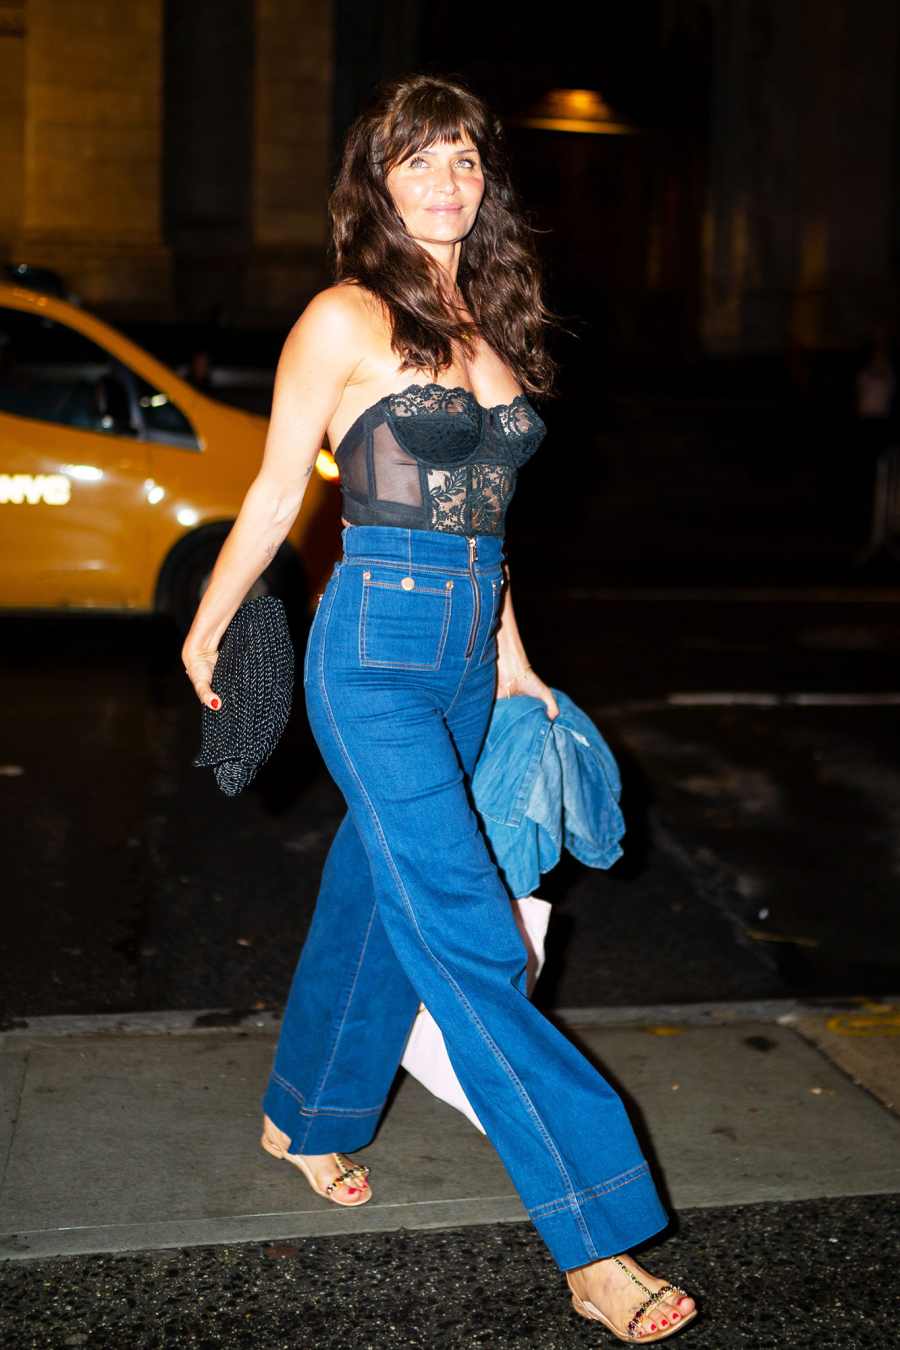 Helena Christensen Gigi Hadid's Famous Friends and Family Celebrate Her Bday in Denim-on-Denim, See Every Look